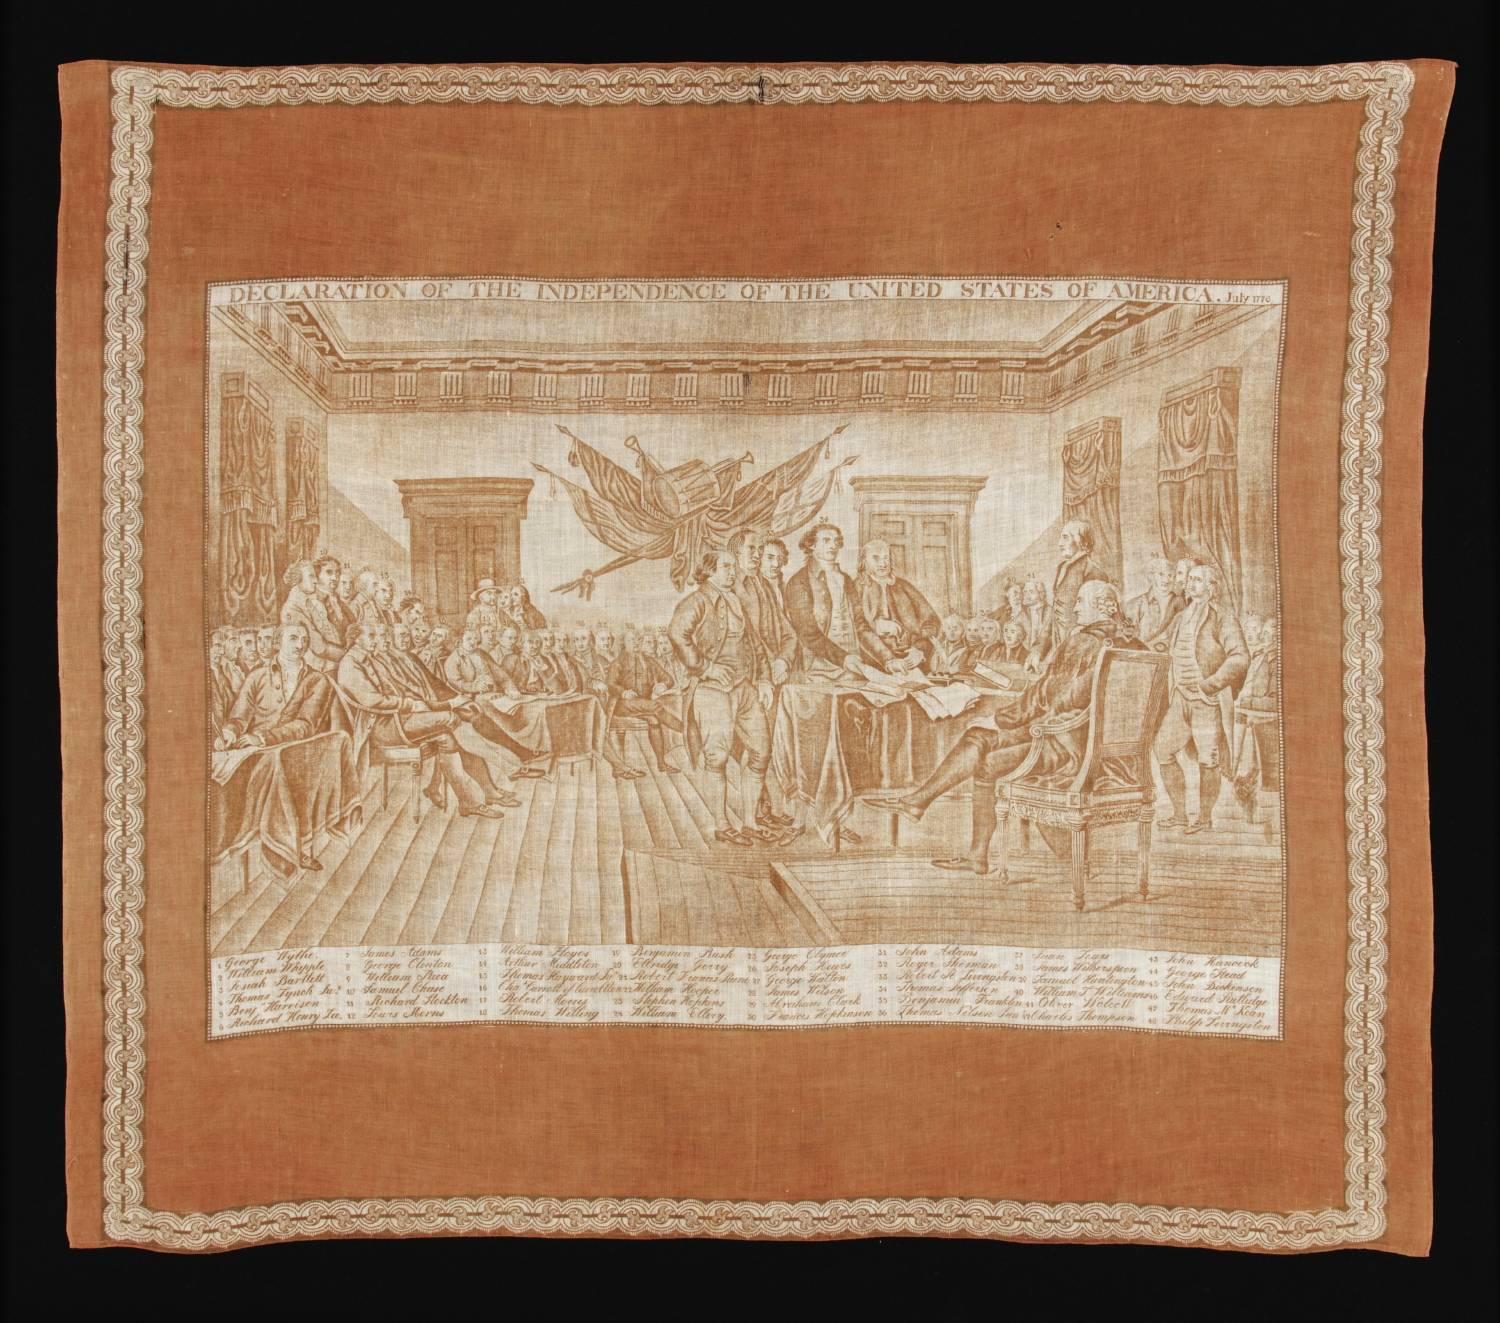 RARE, LARGE SCALE KERCHIEF WITH IMAGE OF JOHN TRUMBULL’S “DECLARATION OF INDEPENDENCE,” MADE FOR THE 1826 SEMI CENTENNIAL:

 Printed on cotton, this extraordinarily detailed, large format kerchief pays respect to the Declaration of Independence